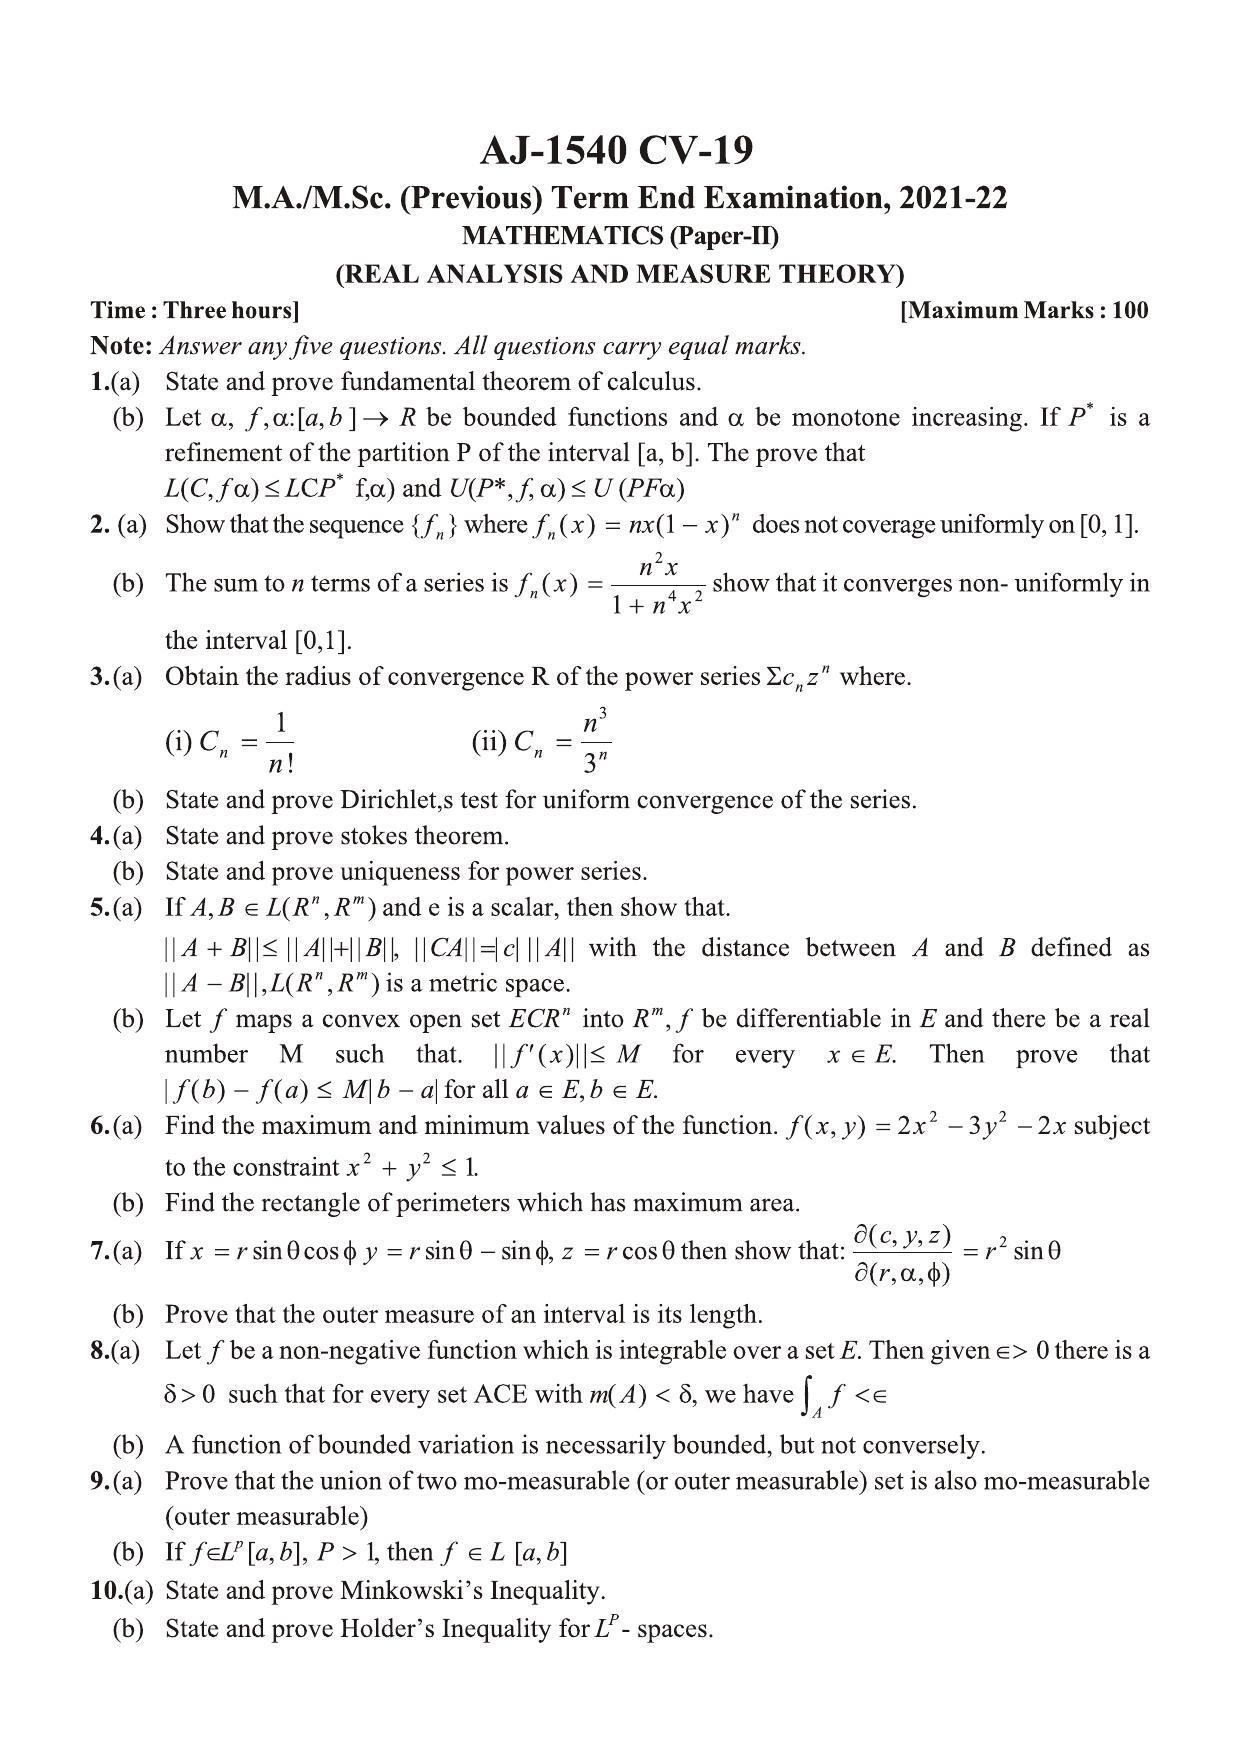 Bilaspur University Question Paper 2021-2022:M.A (Previous) Mathematics Real Analysis & Measure Theory Paper 1 - Page 1